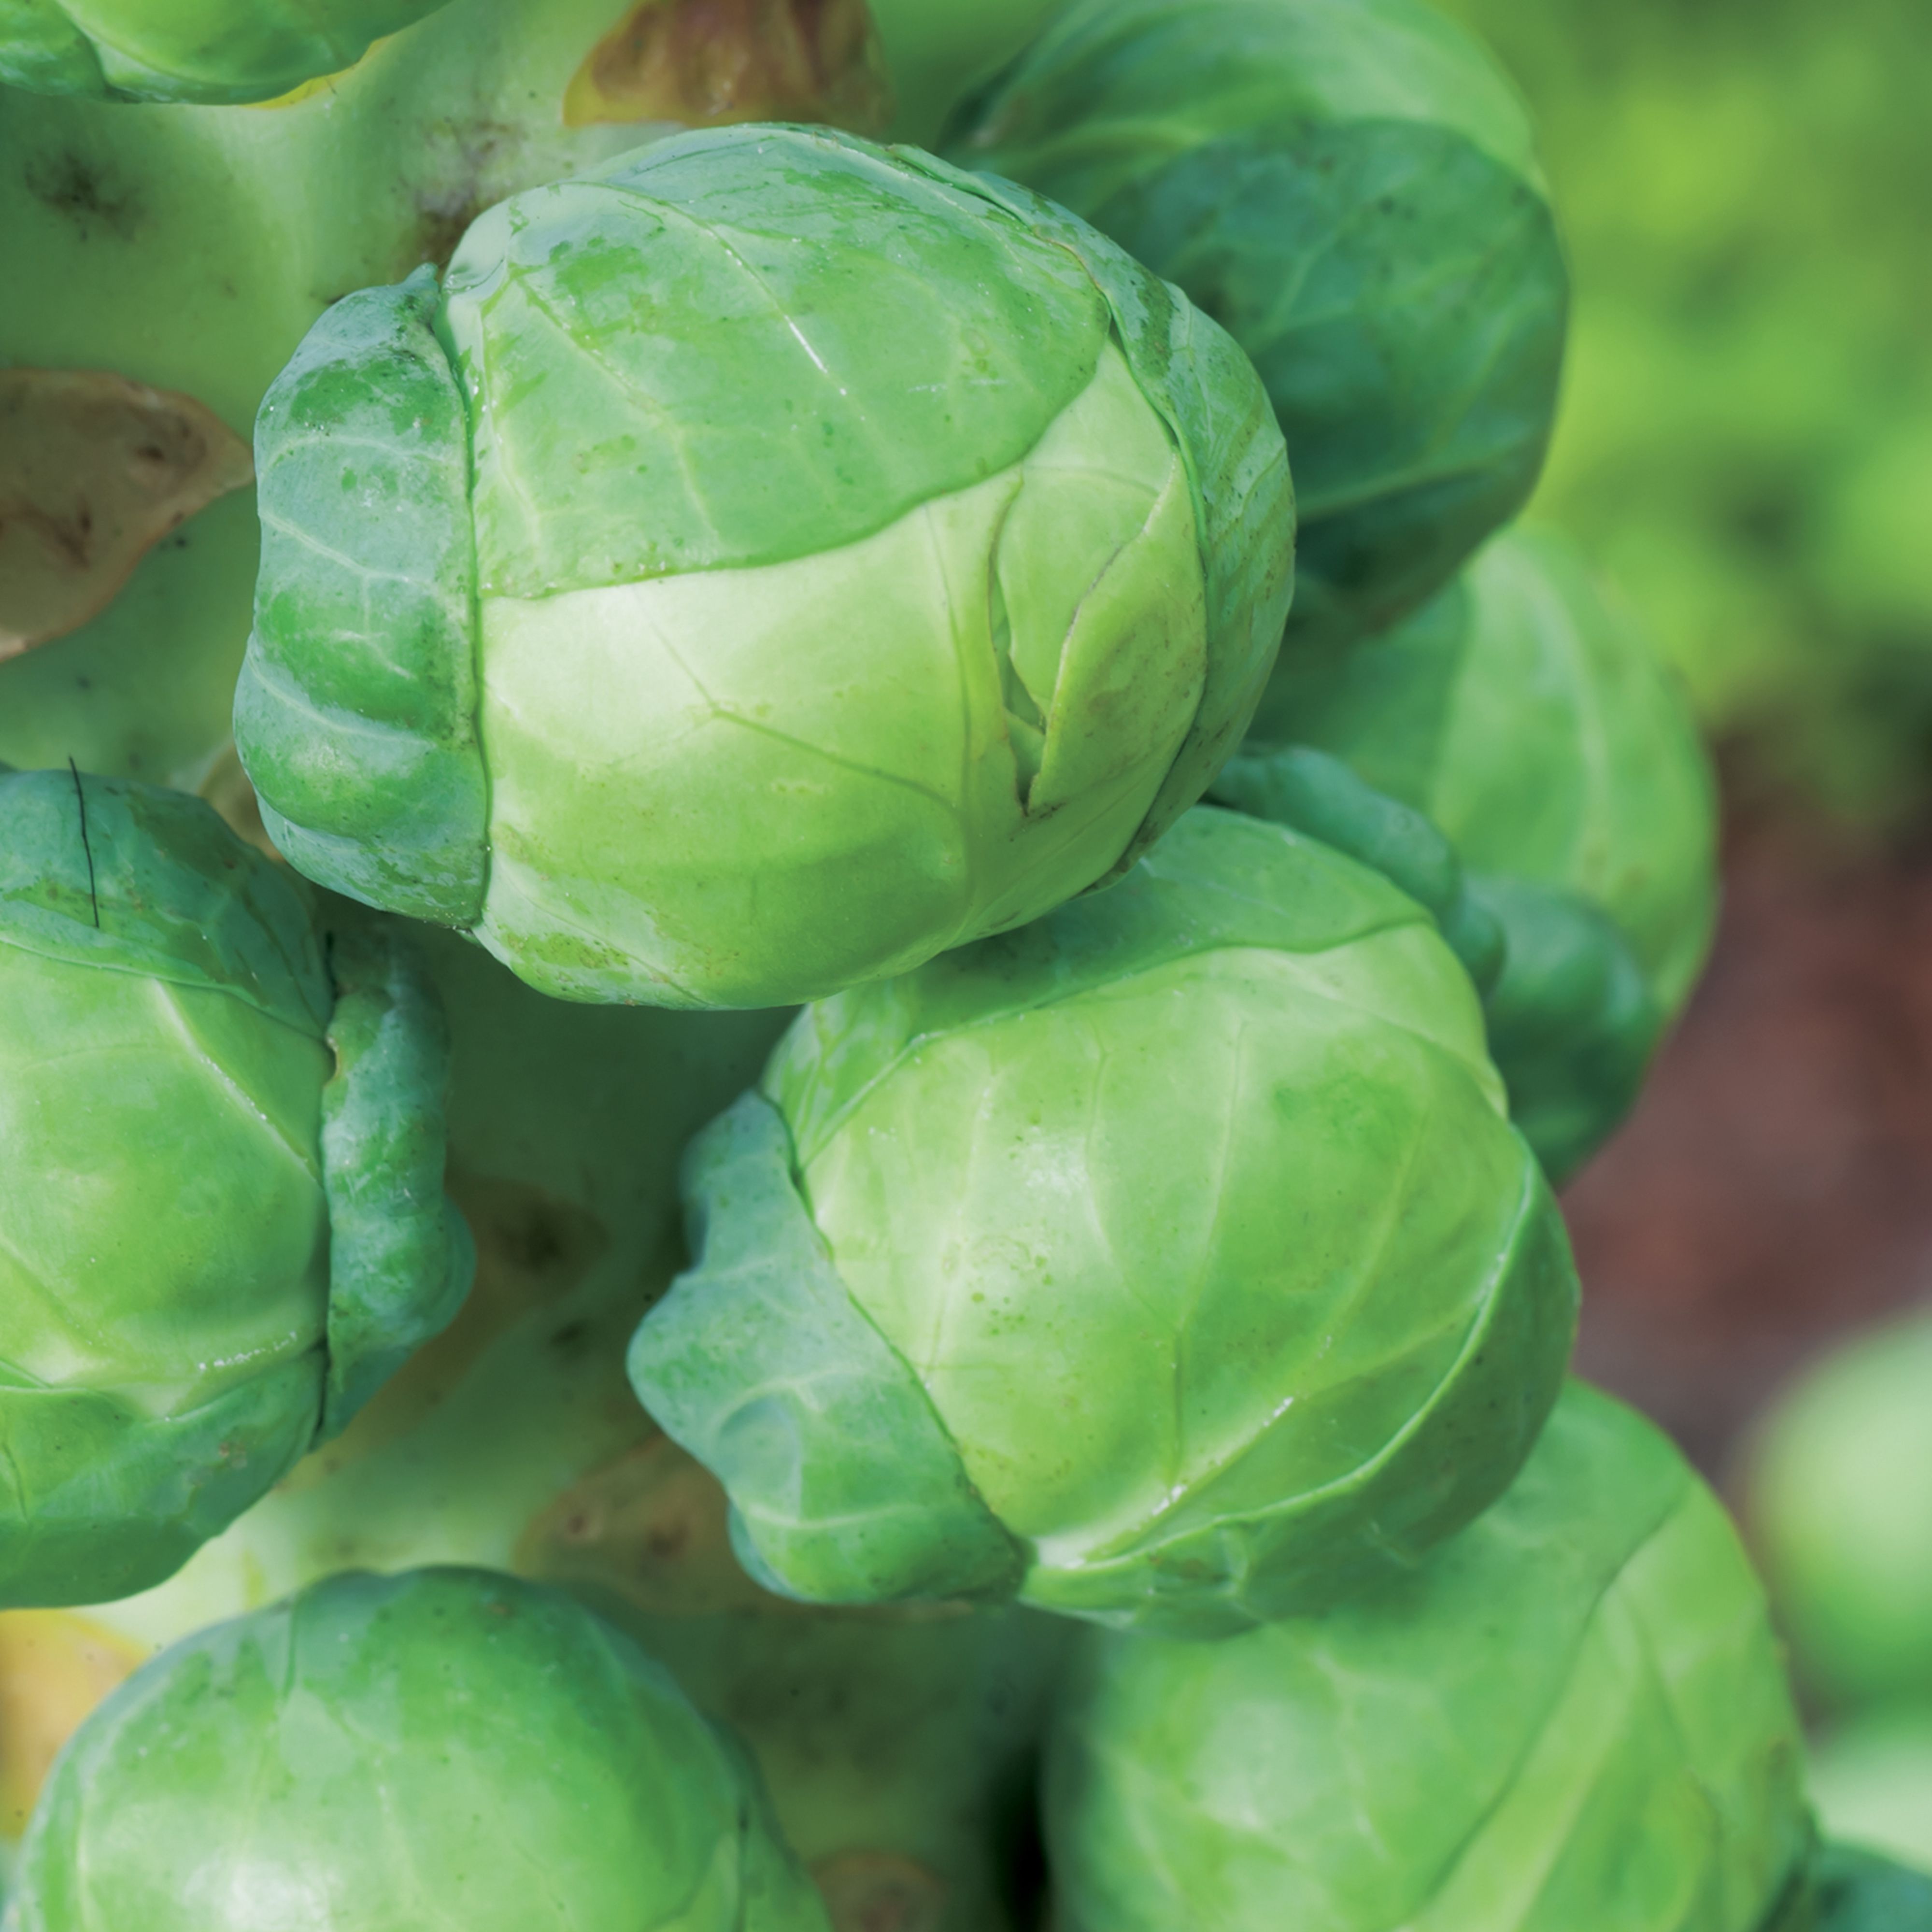 RHS Igor F1 Brussel sprout Seed